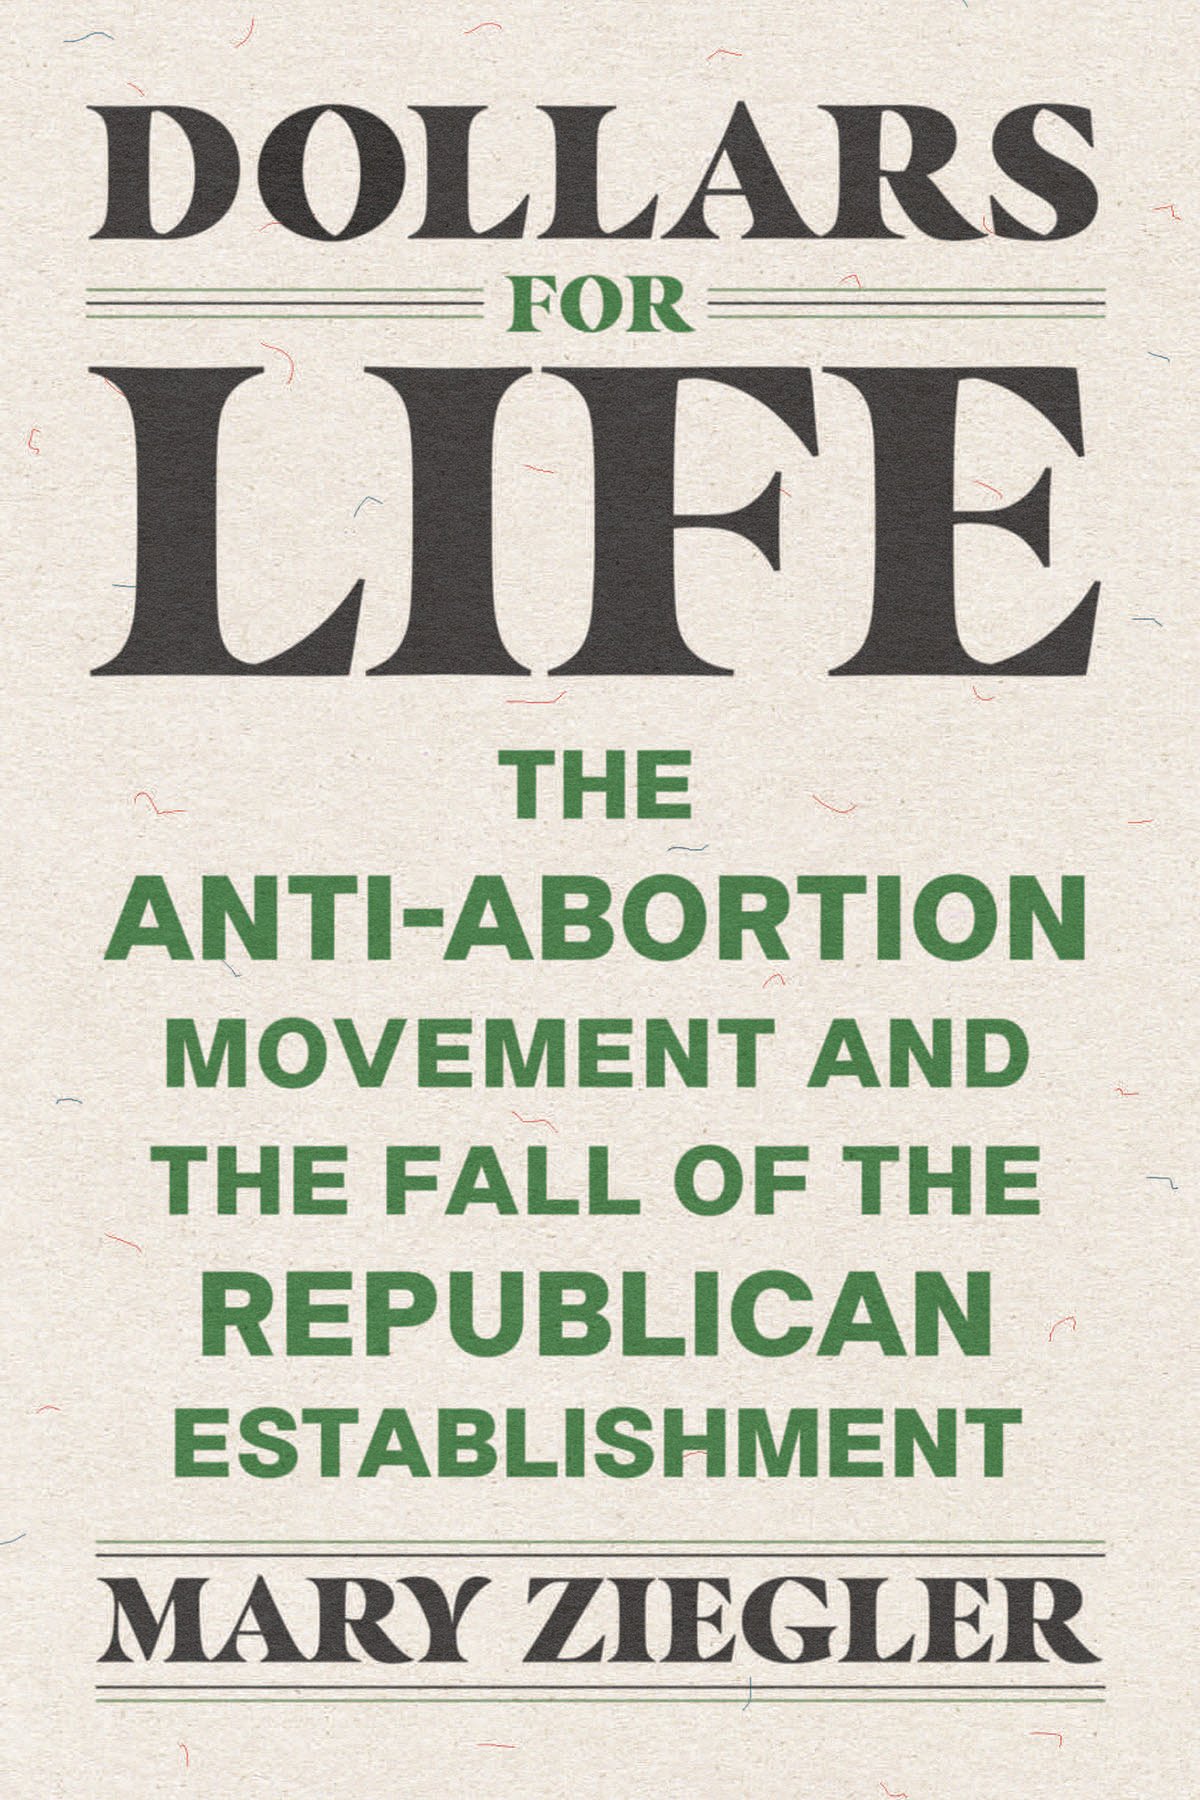 Cover of Mary Ziegler's book "Dollars for Life: The Anti-Abortion Movement and the Fall of the Republican Establishment."